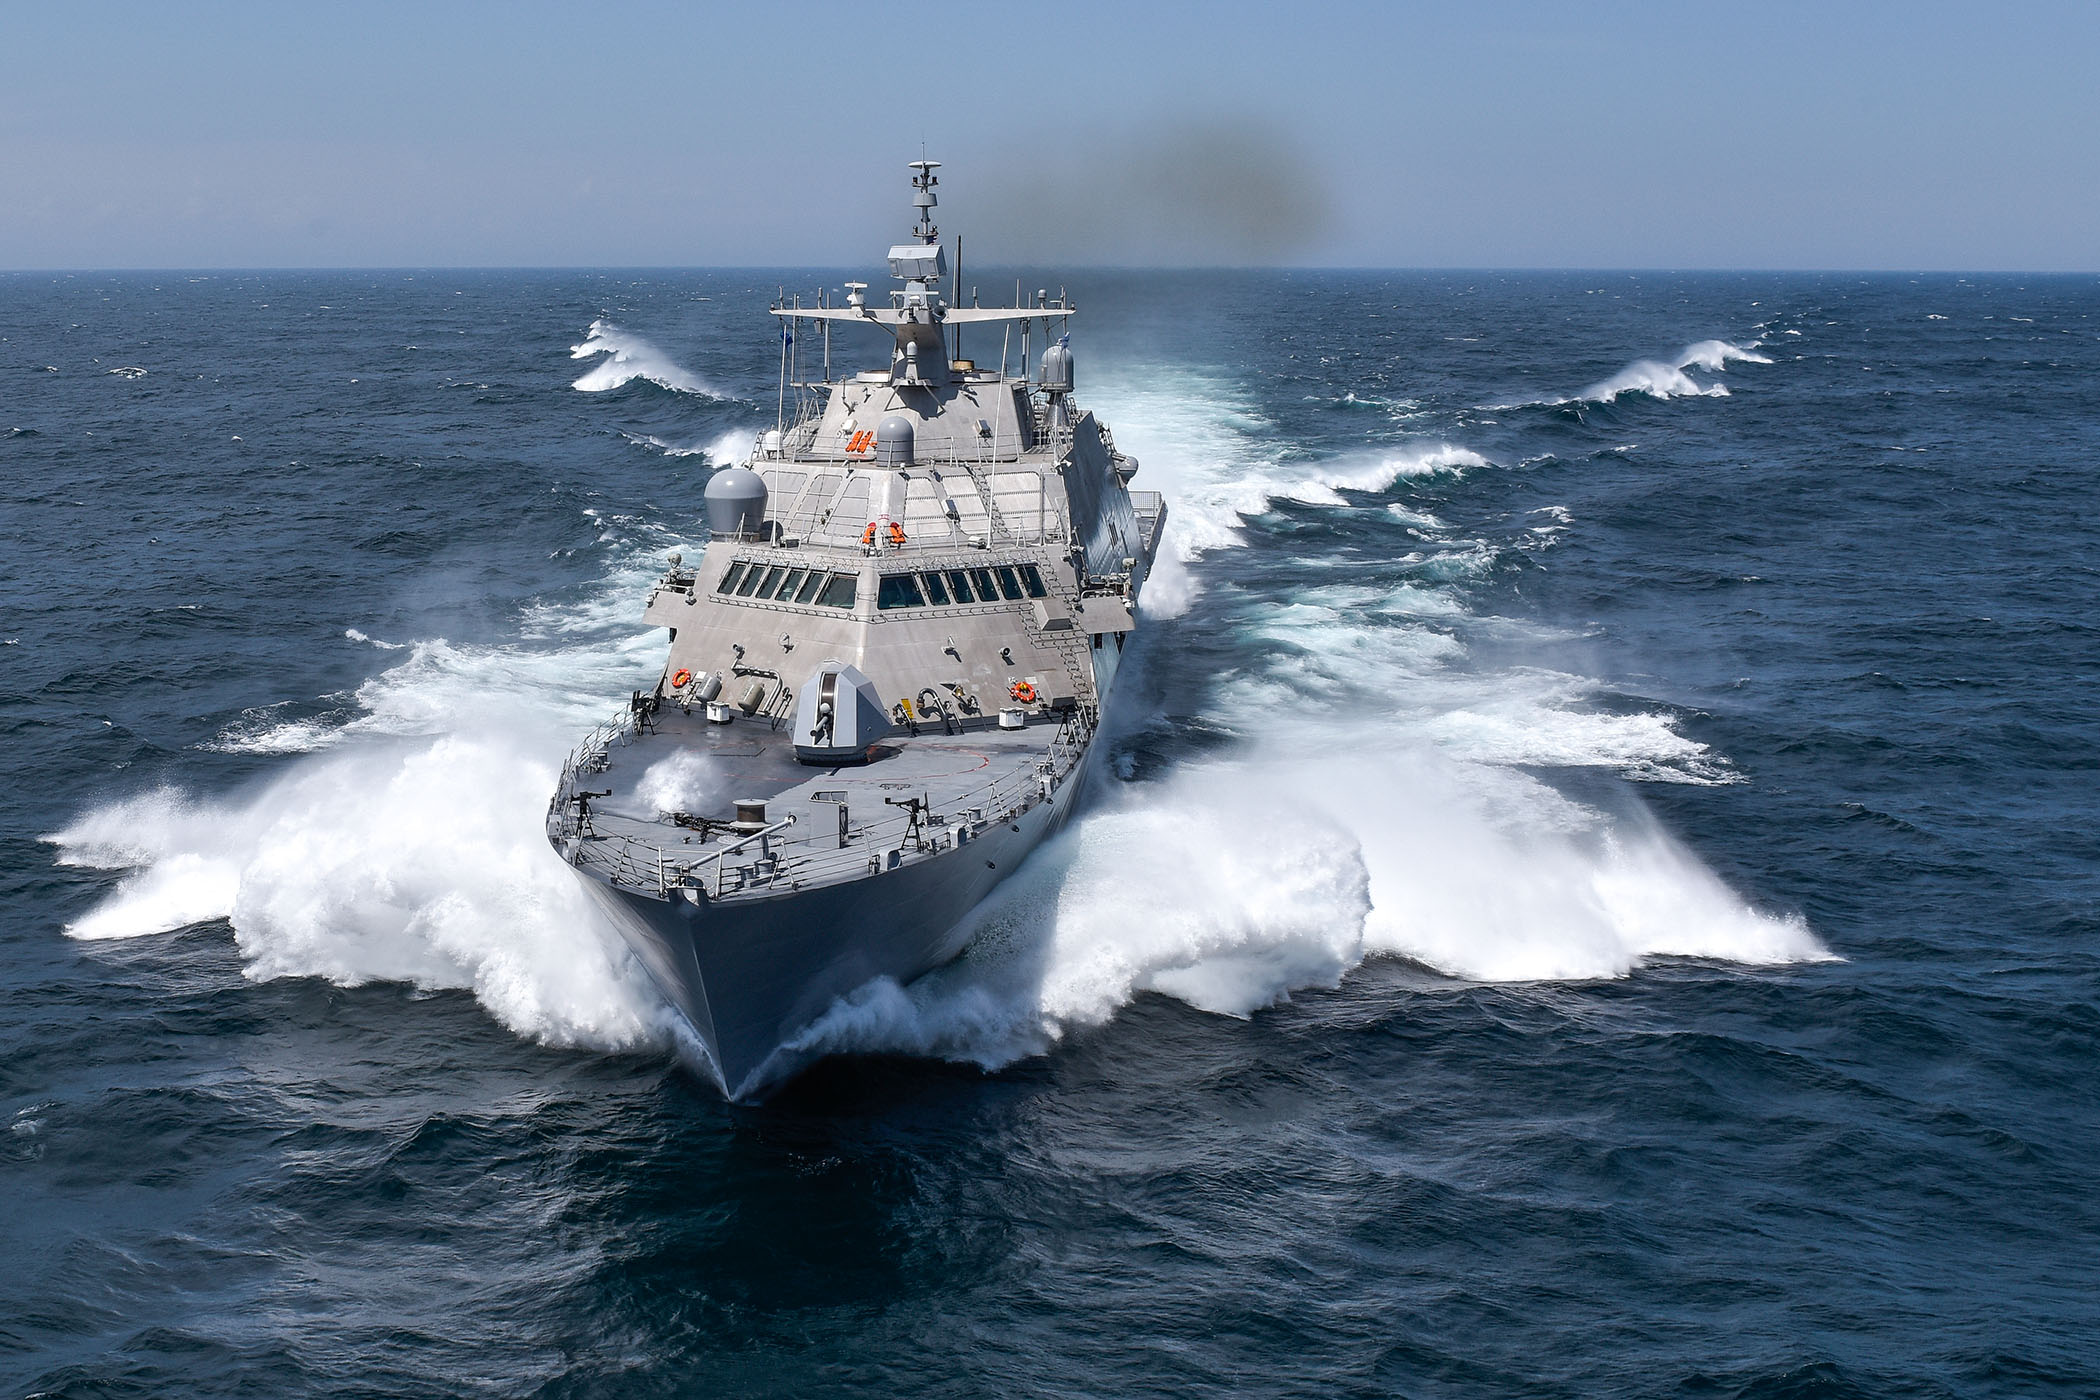 USS Detroit (LCS-7), a littoral combat ship of the US Navy, is seen sailing the waters. Sea mists are seen spraying from its sides as it moves on the water.